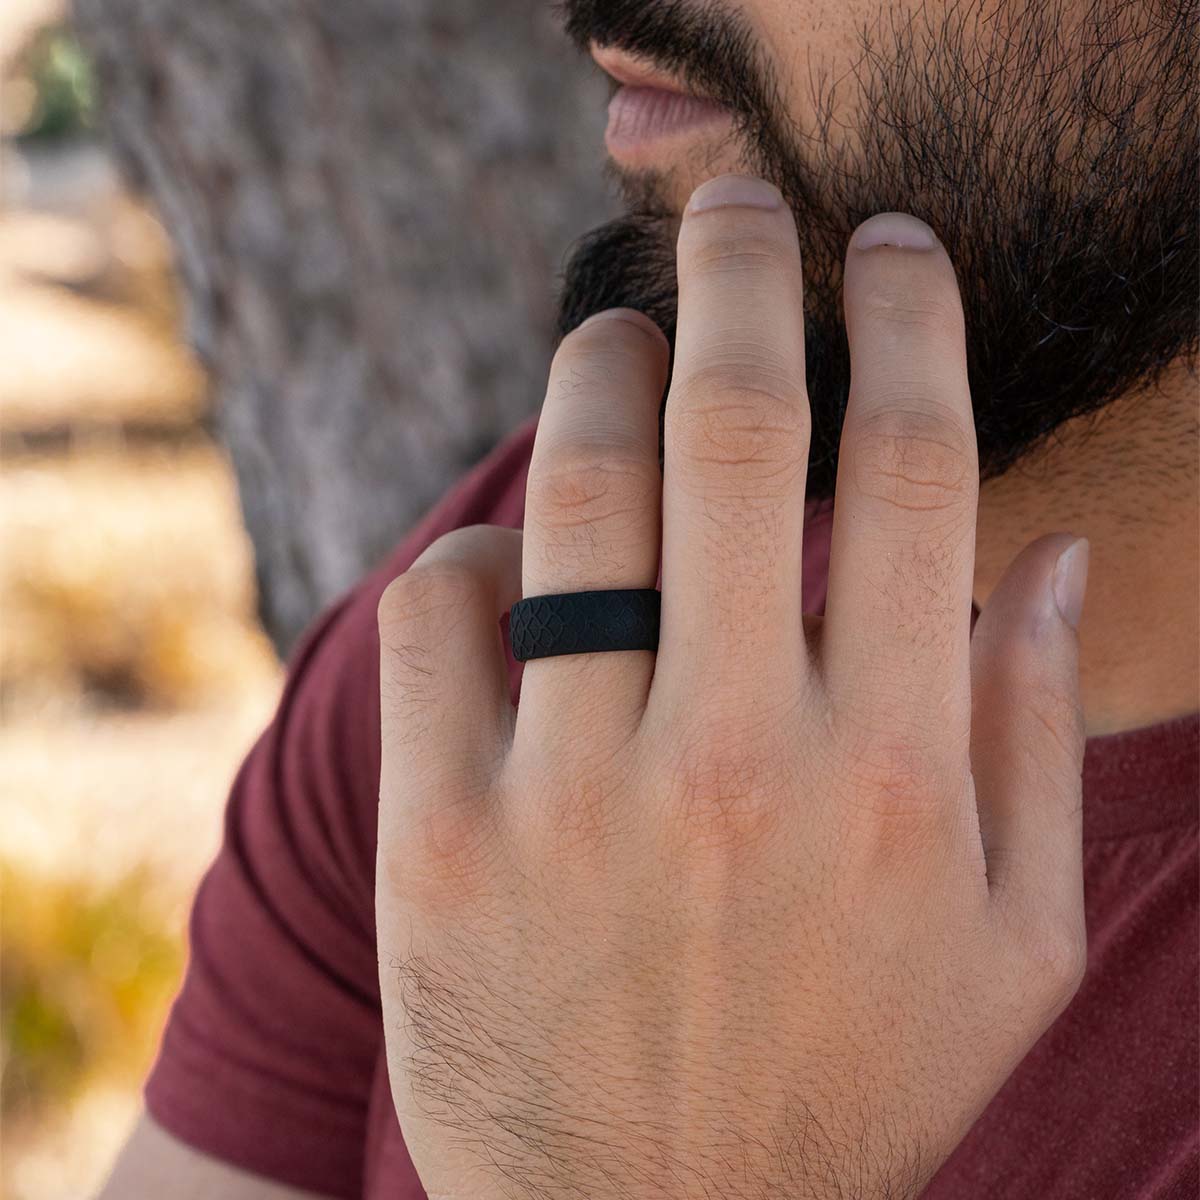 Comfortable black silicone wedding ring on a male hand